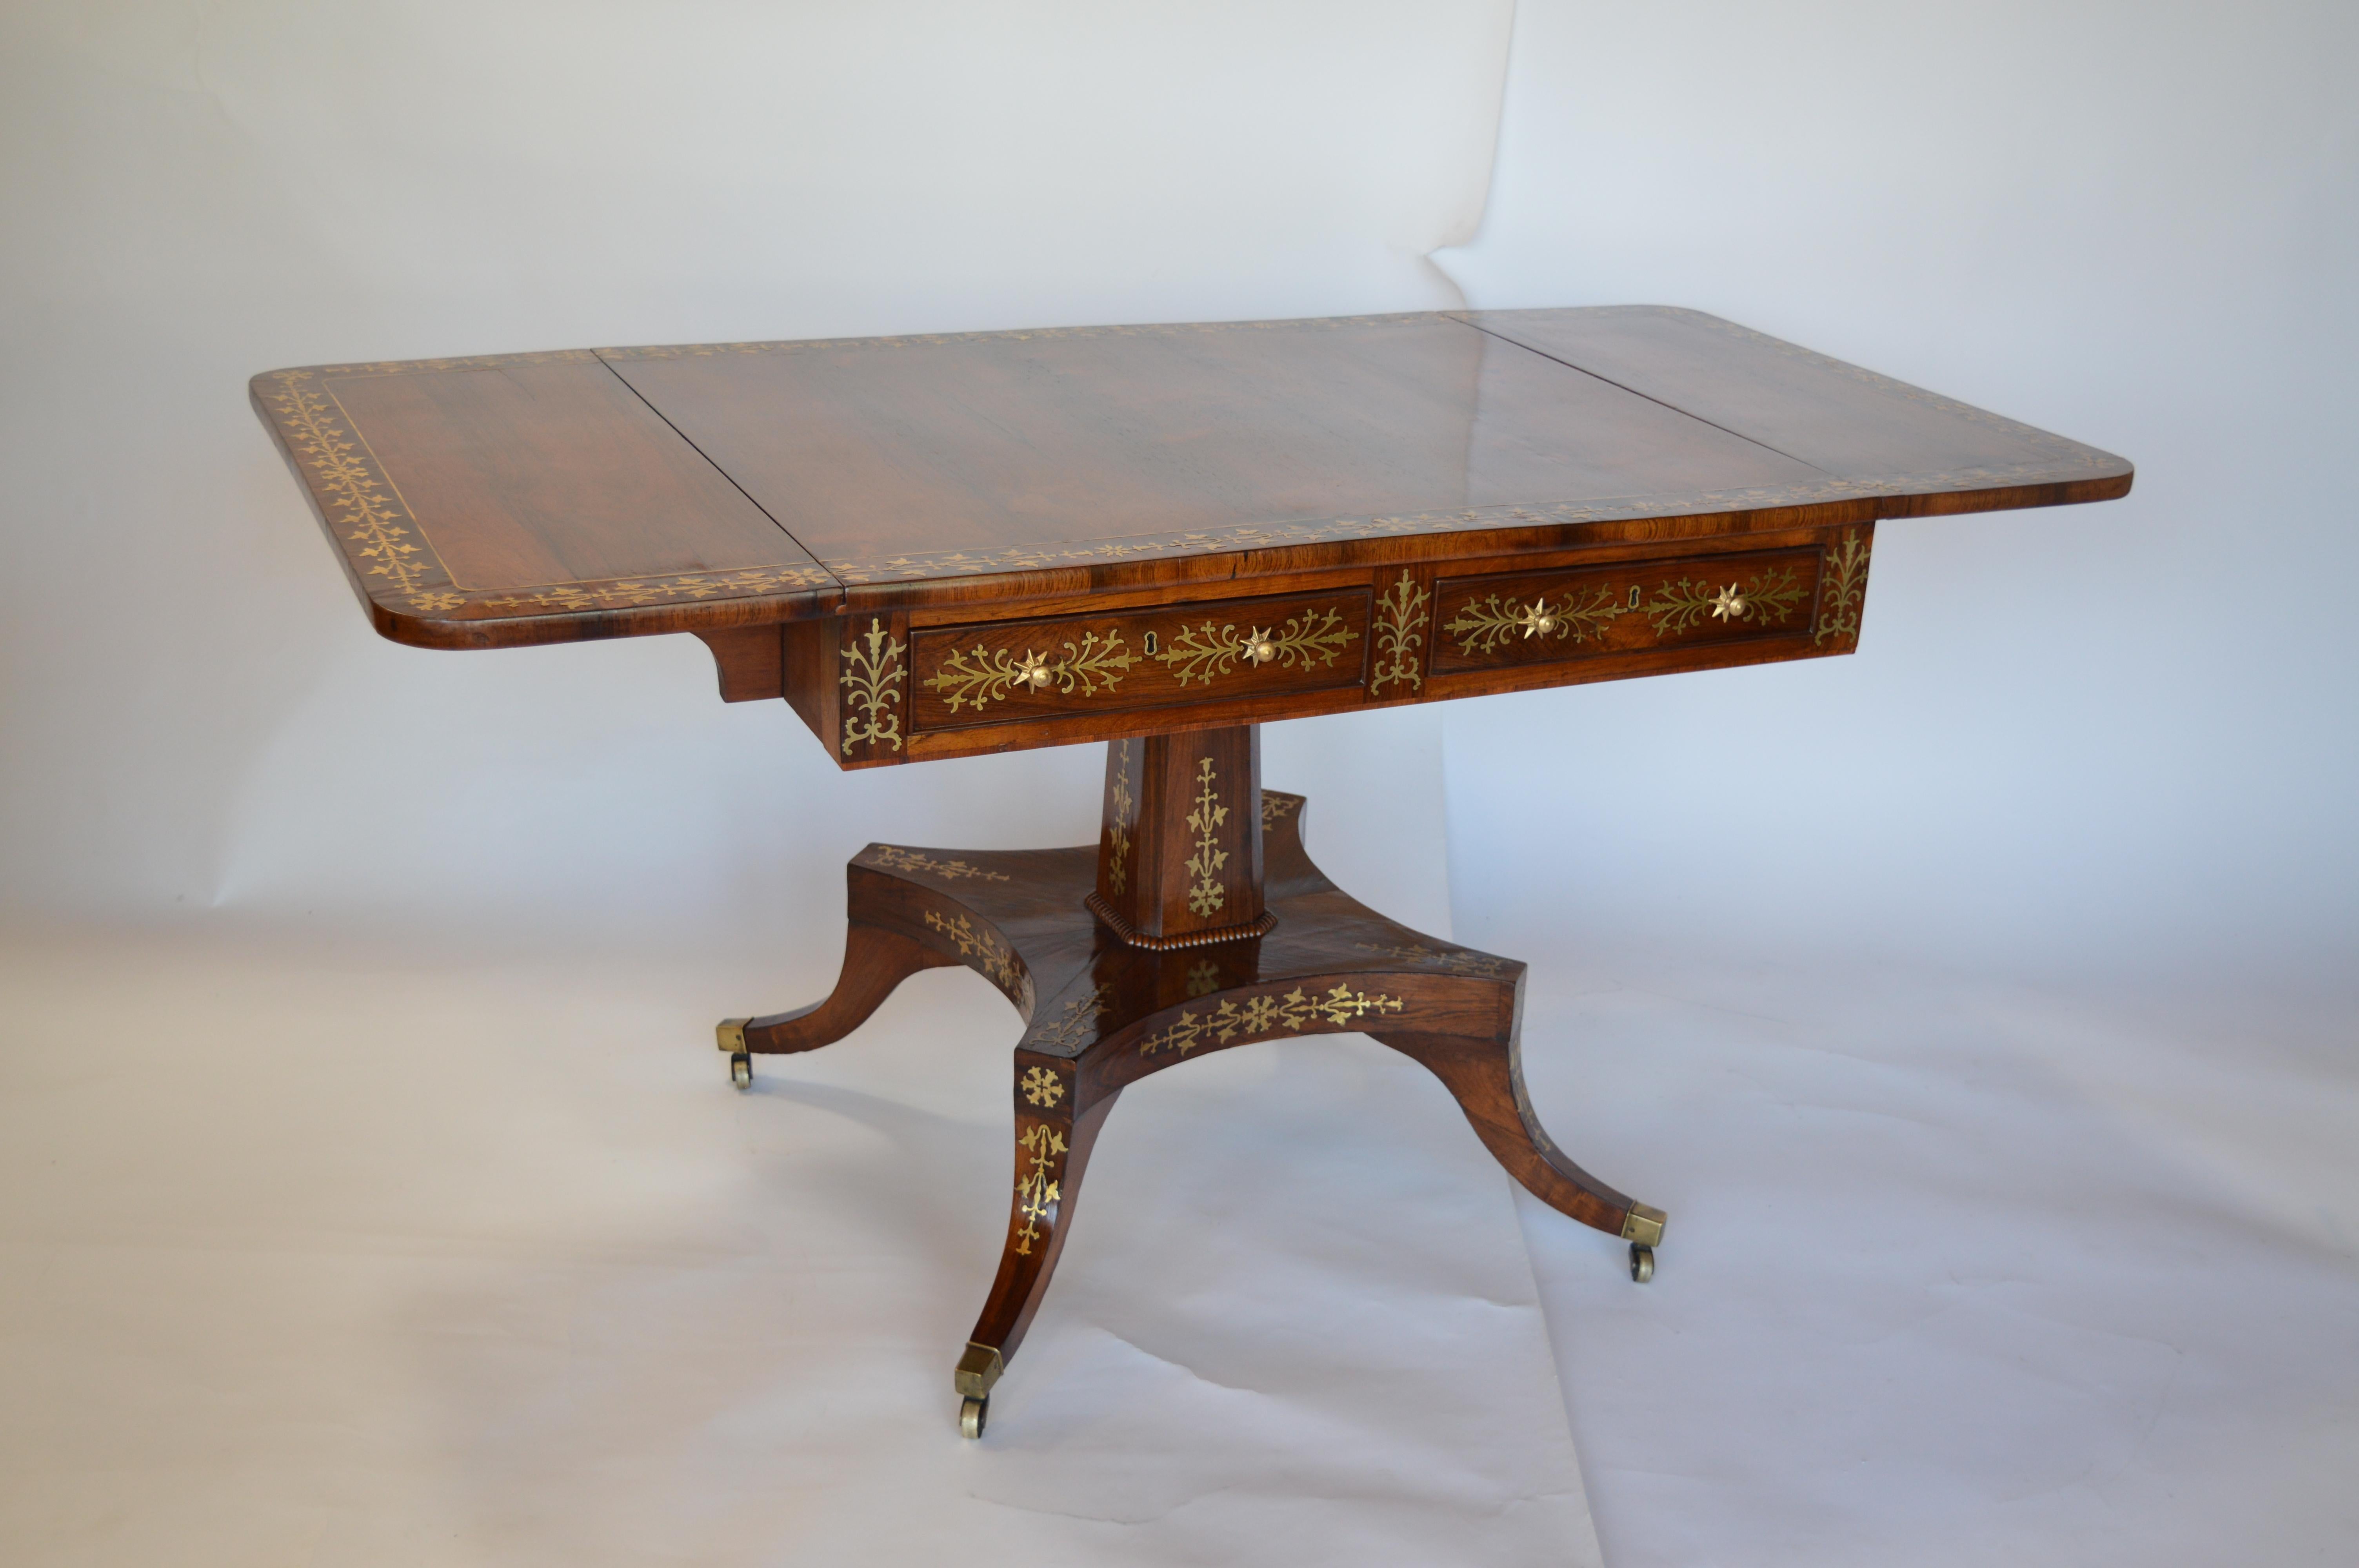 Regency rosewood pedestal table with brass inlaid and flowered details. Includes turned supports at the bottom of each leg.

